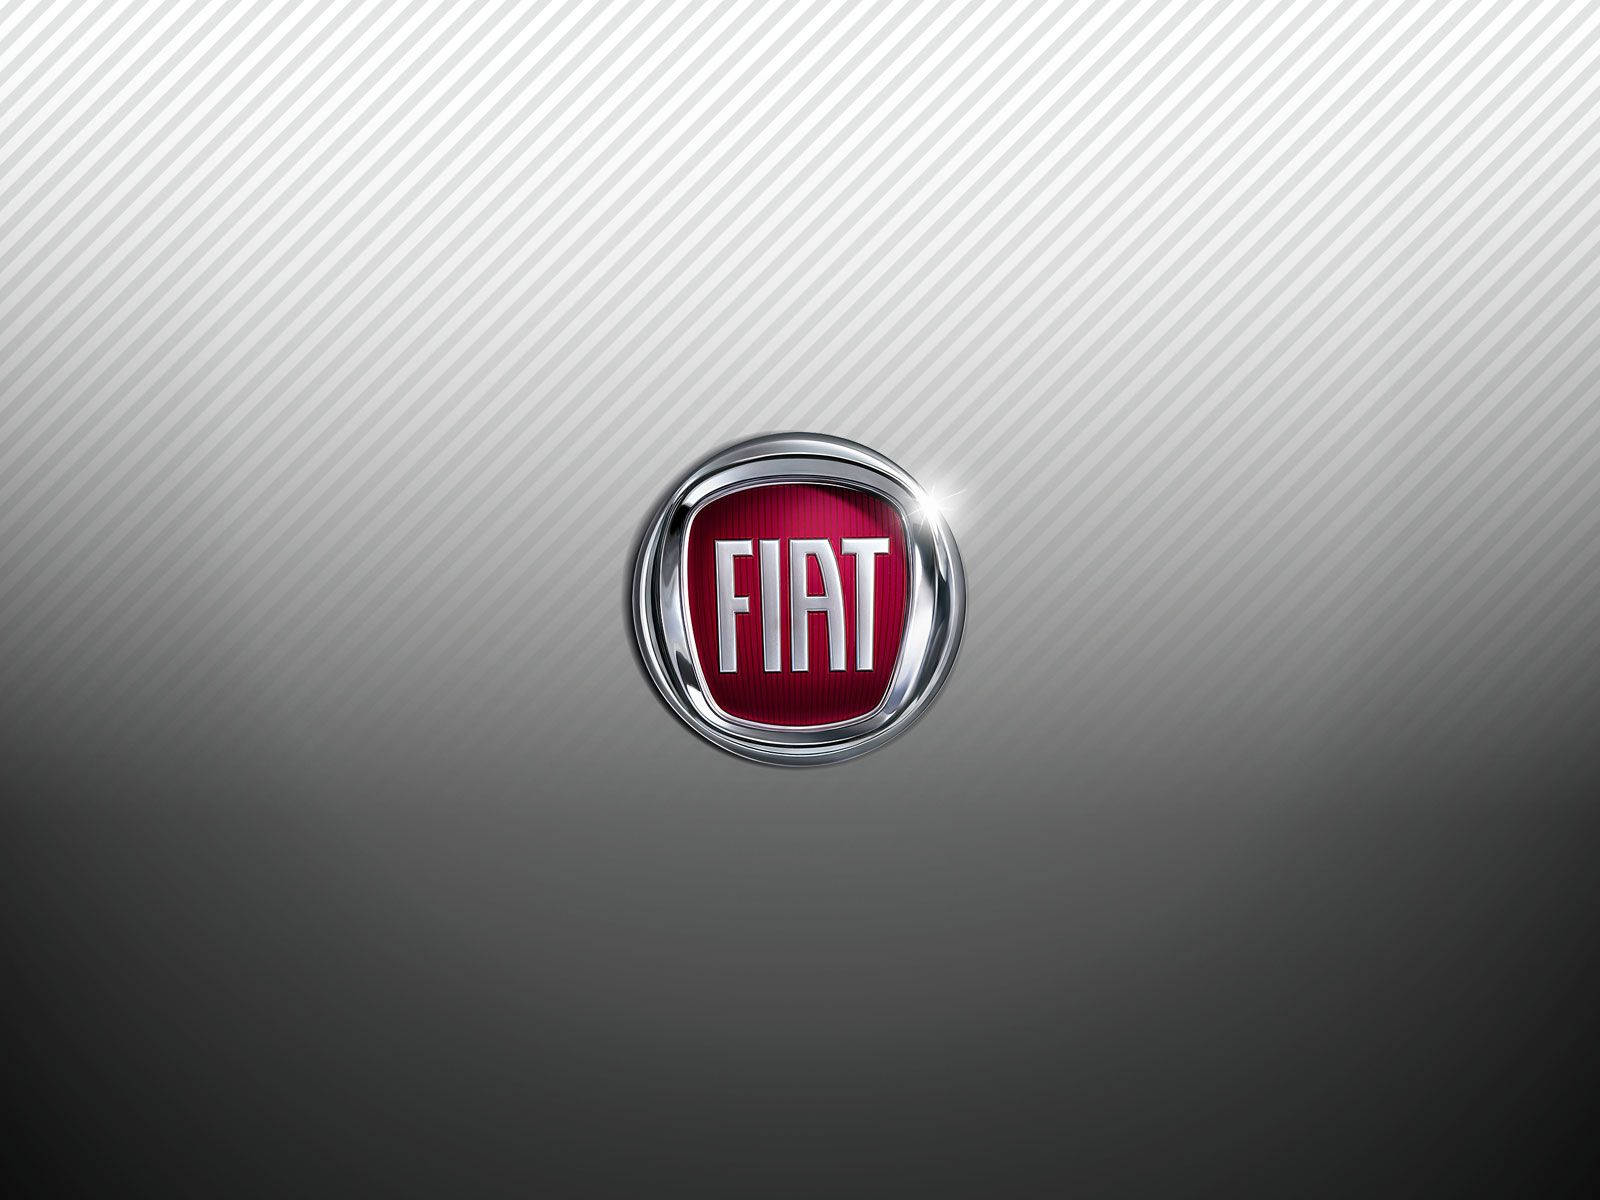 Fiat Official Logo Background